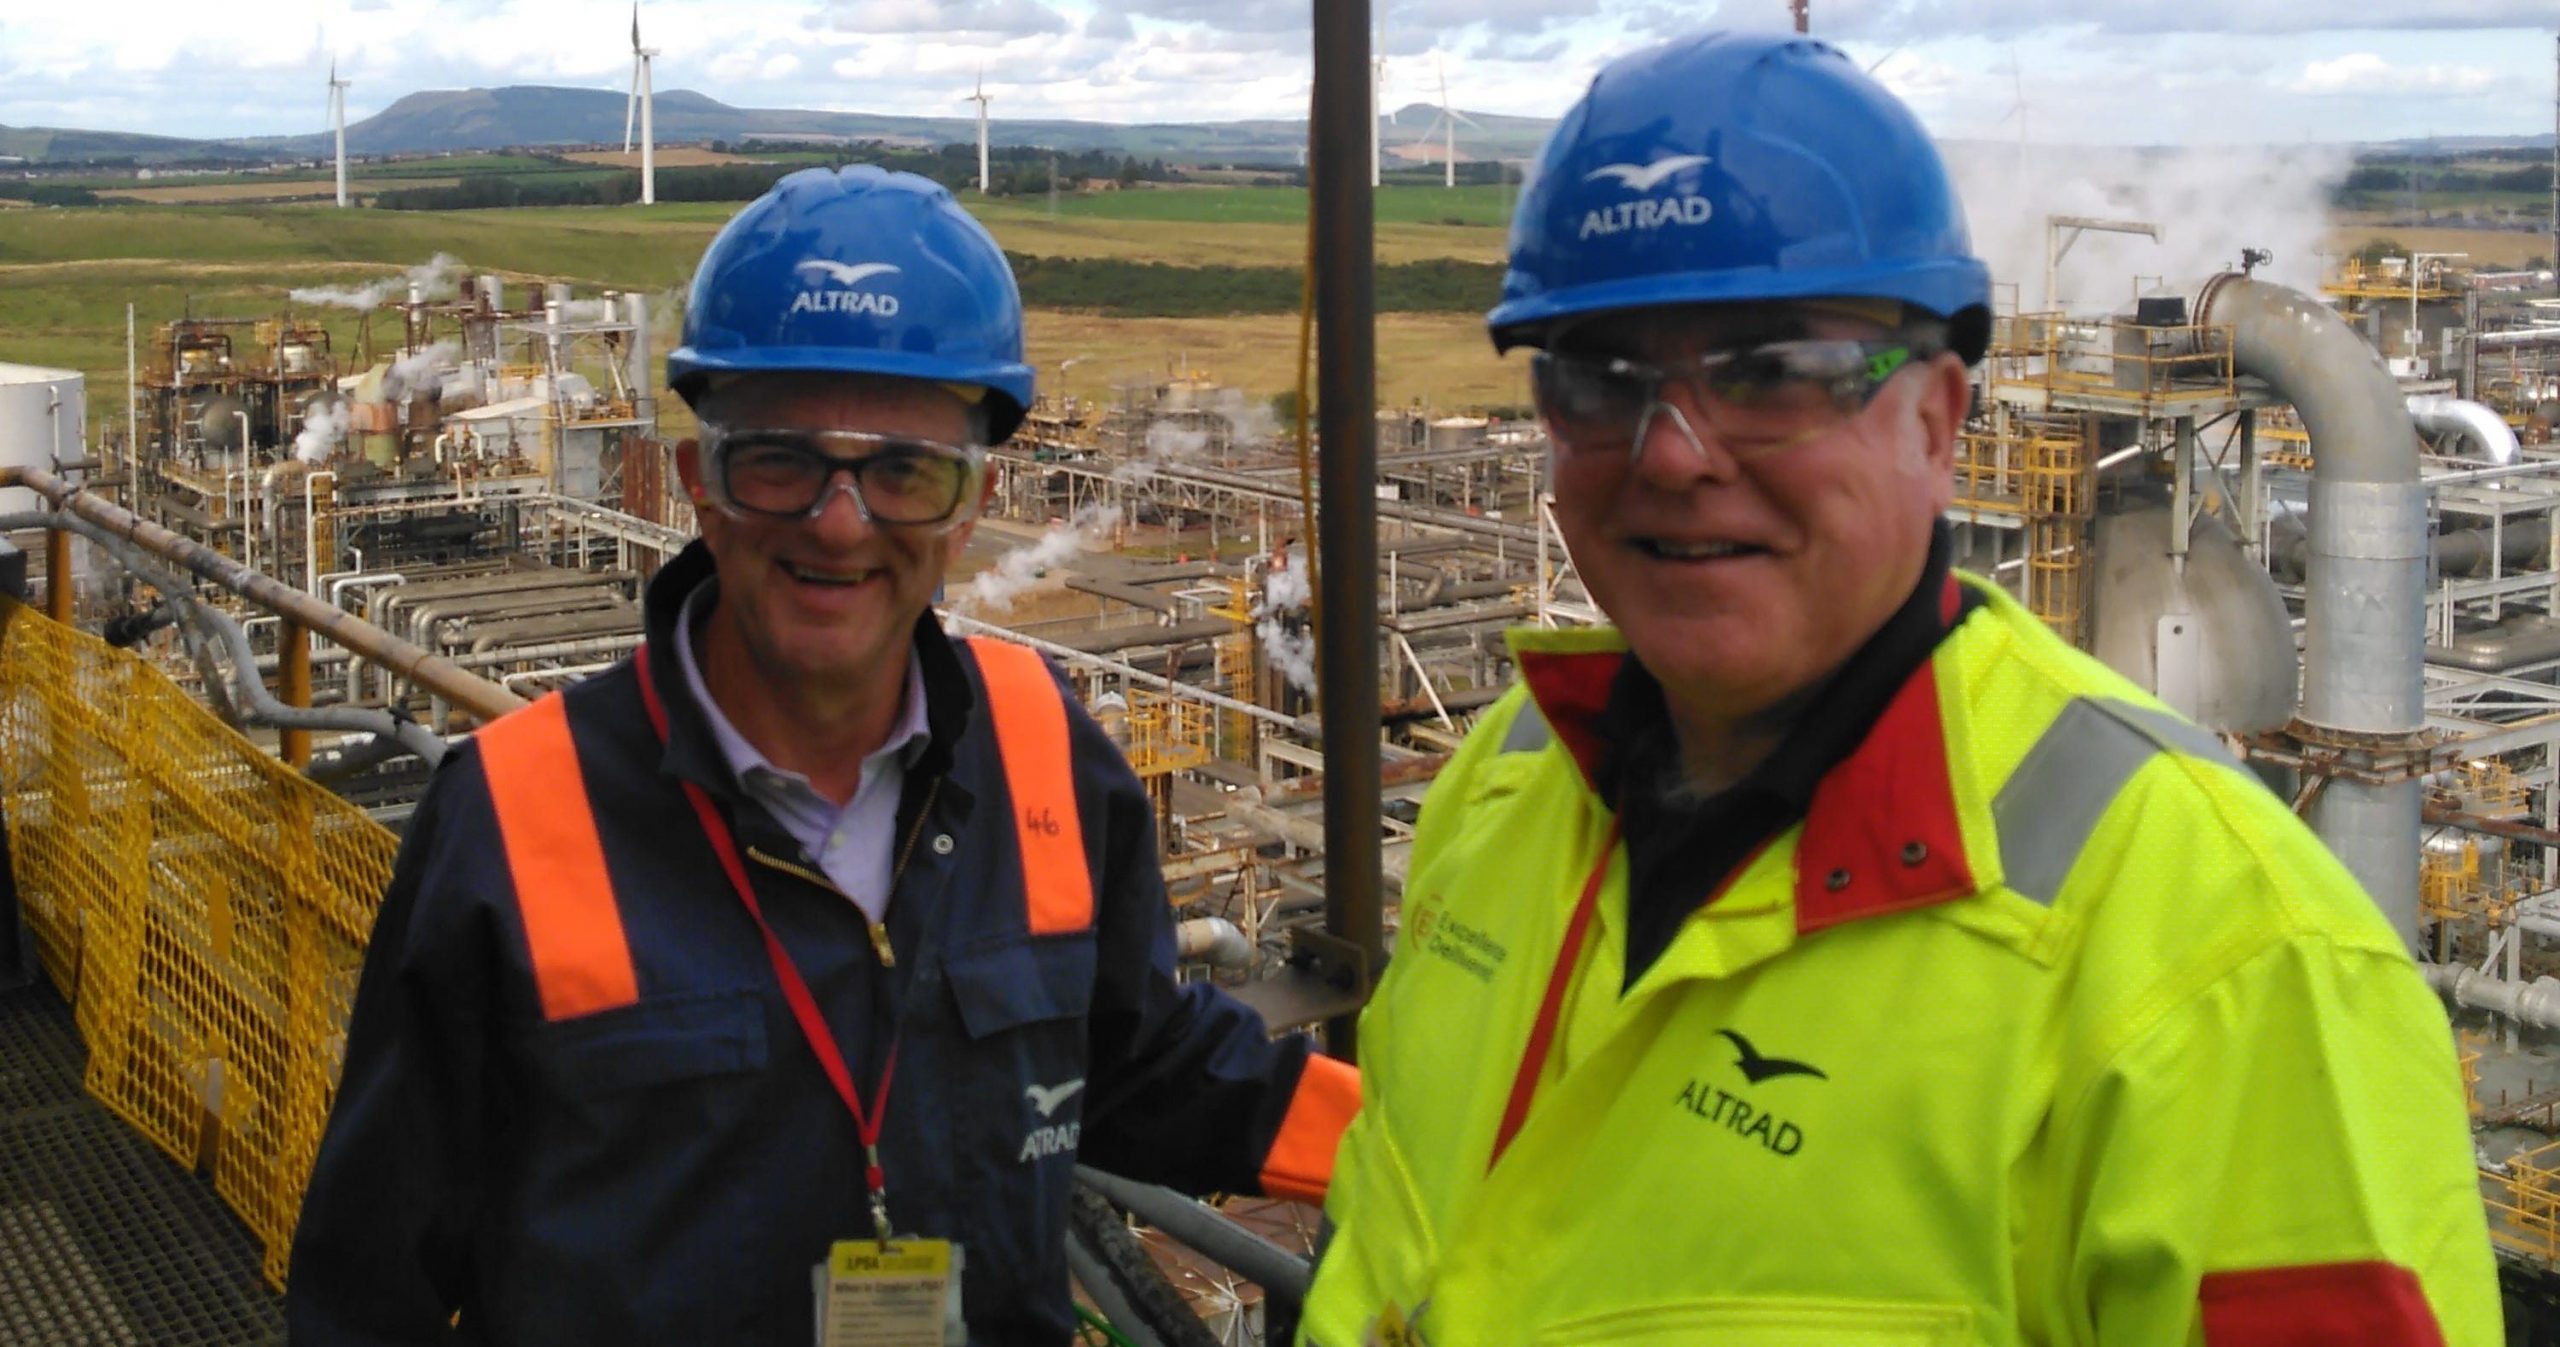 CEO Andrew Hockey Left With ECITB Account Manager Paul Hynd During A Visit To The Fife Ethylene Plant FEP Mossmorran Facility In Scotland Scaled Aspect Ratio 760 400